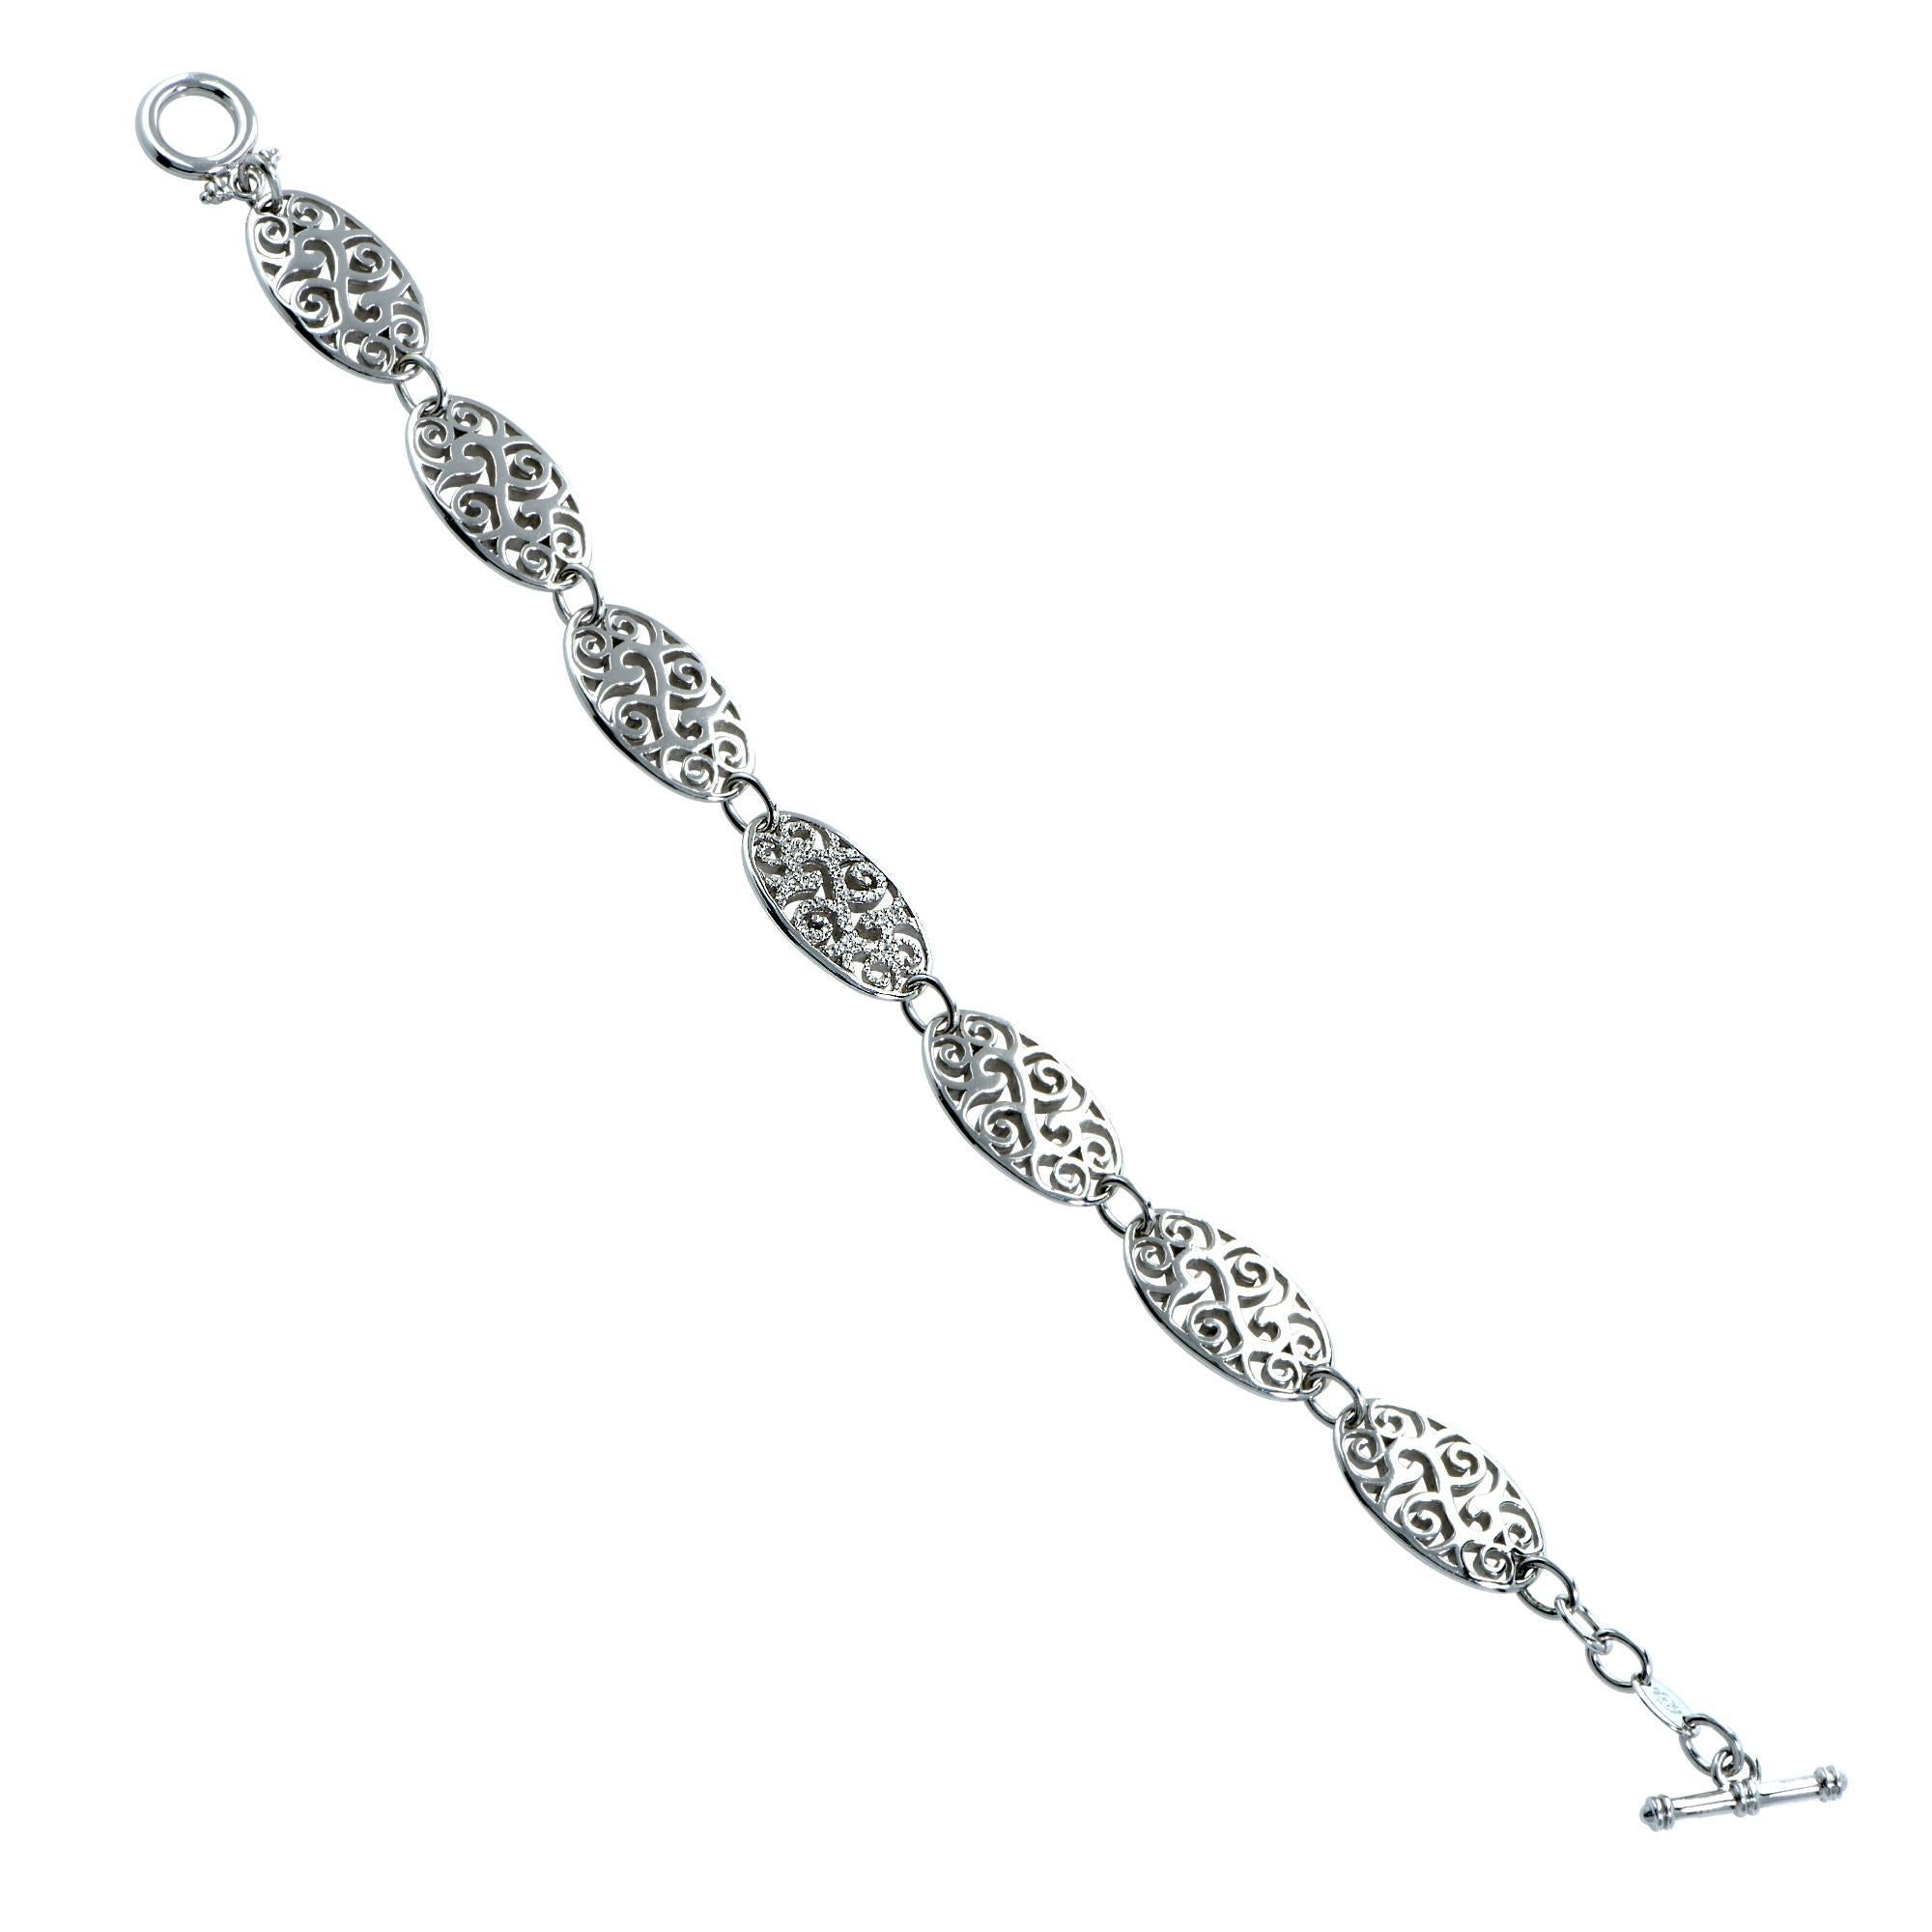 18k White Gold and Diamond Bracelet featuring 38 round brilliant cut diamonds weighing approximately .14 carats total weight, G color, VS clarity. Seven oval shaped links with a stunning swirl and swag motif make up this gorgeous bracelet. The